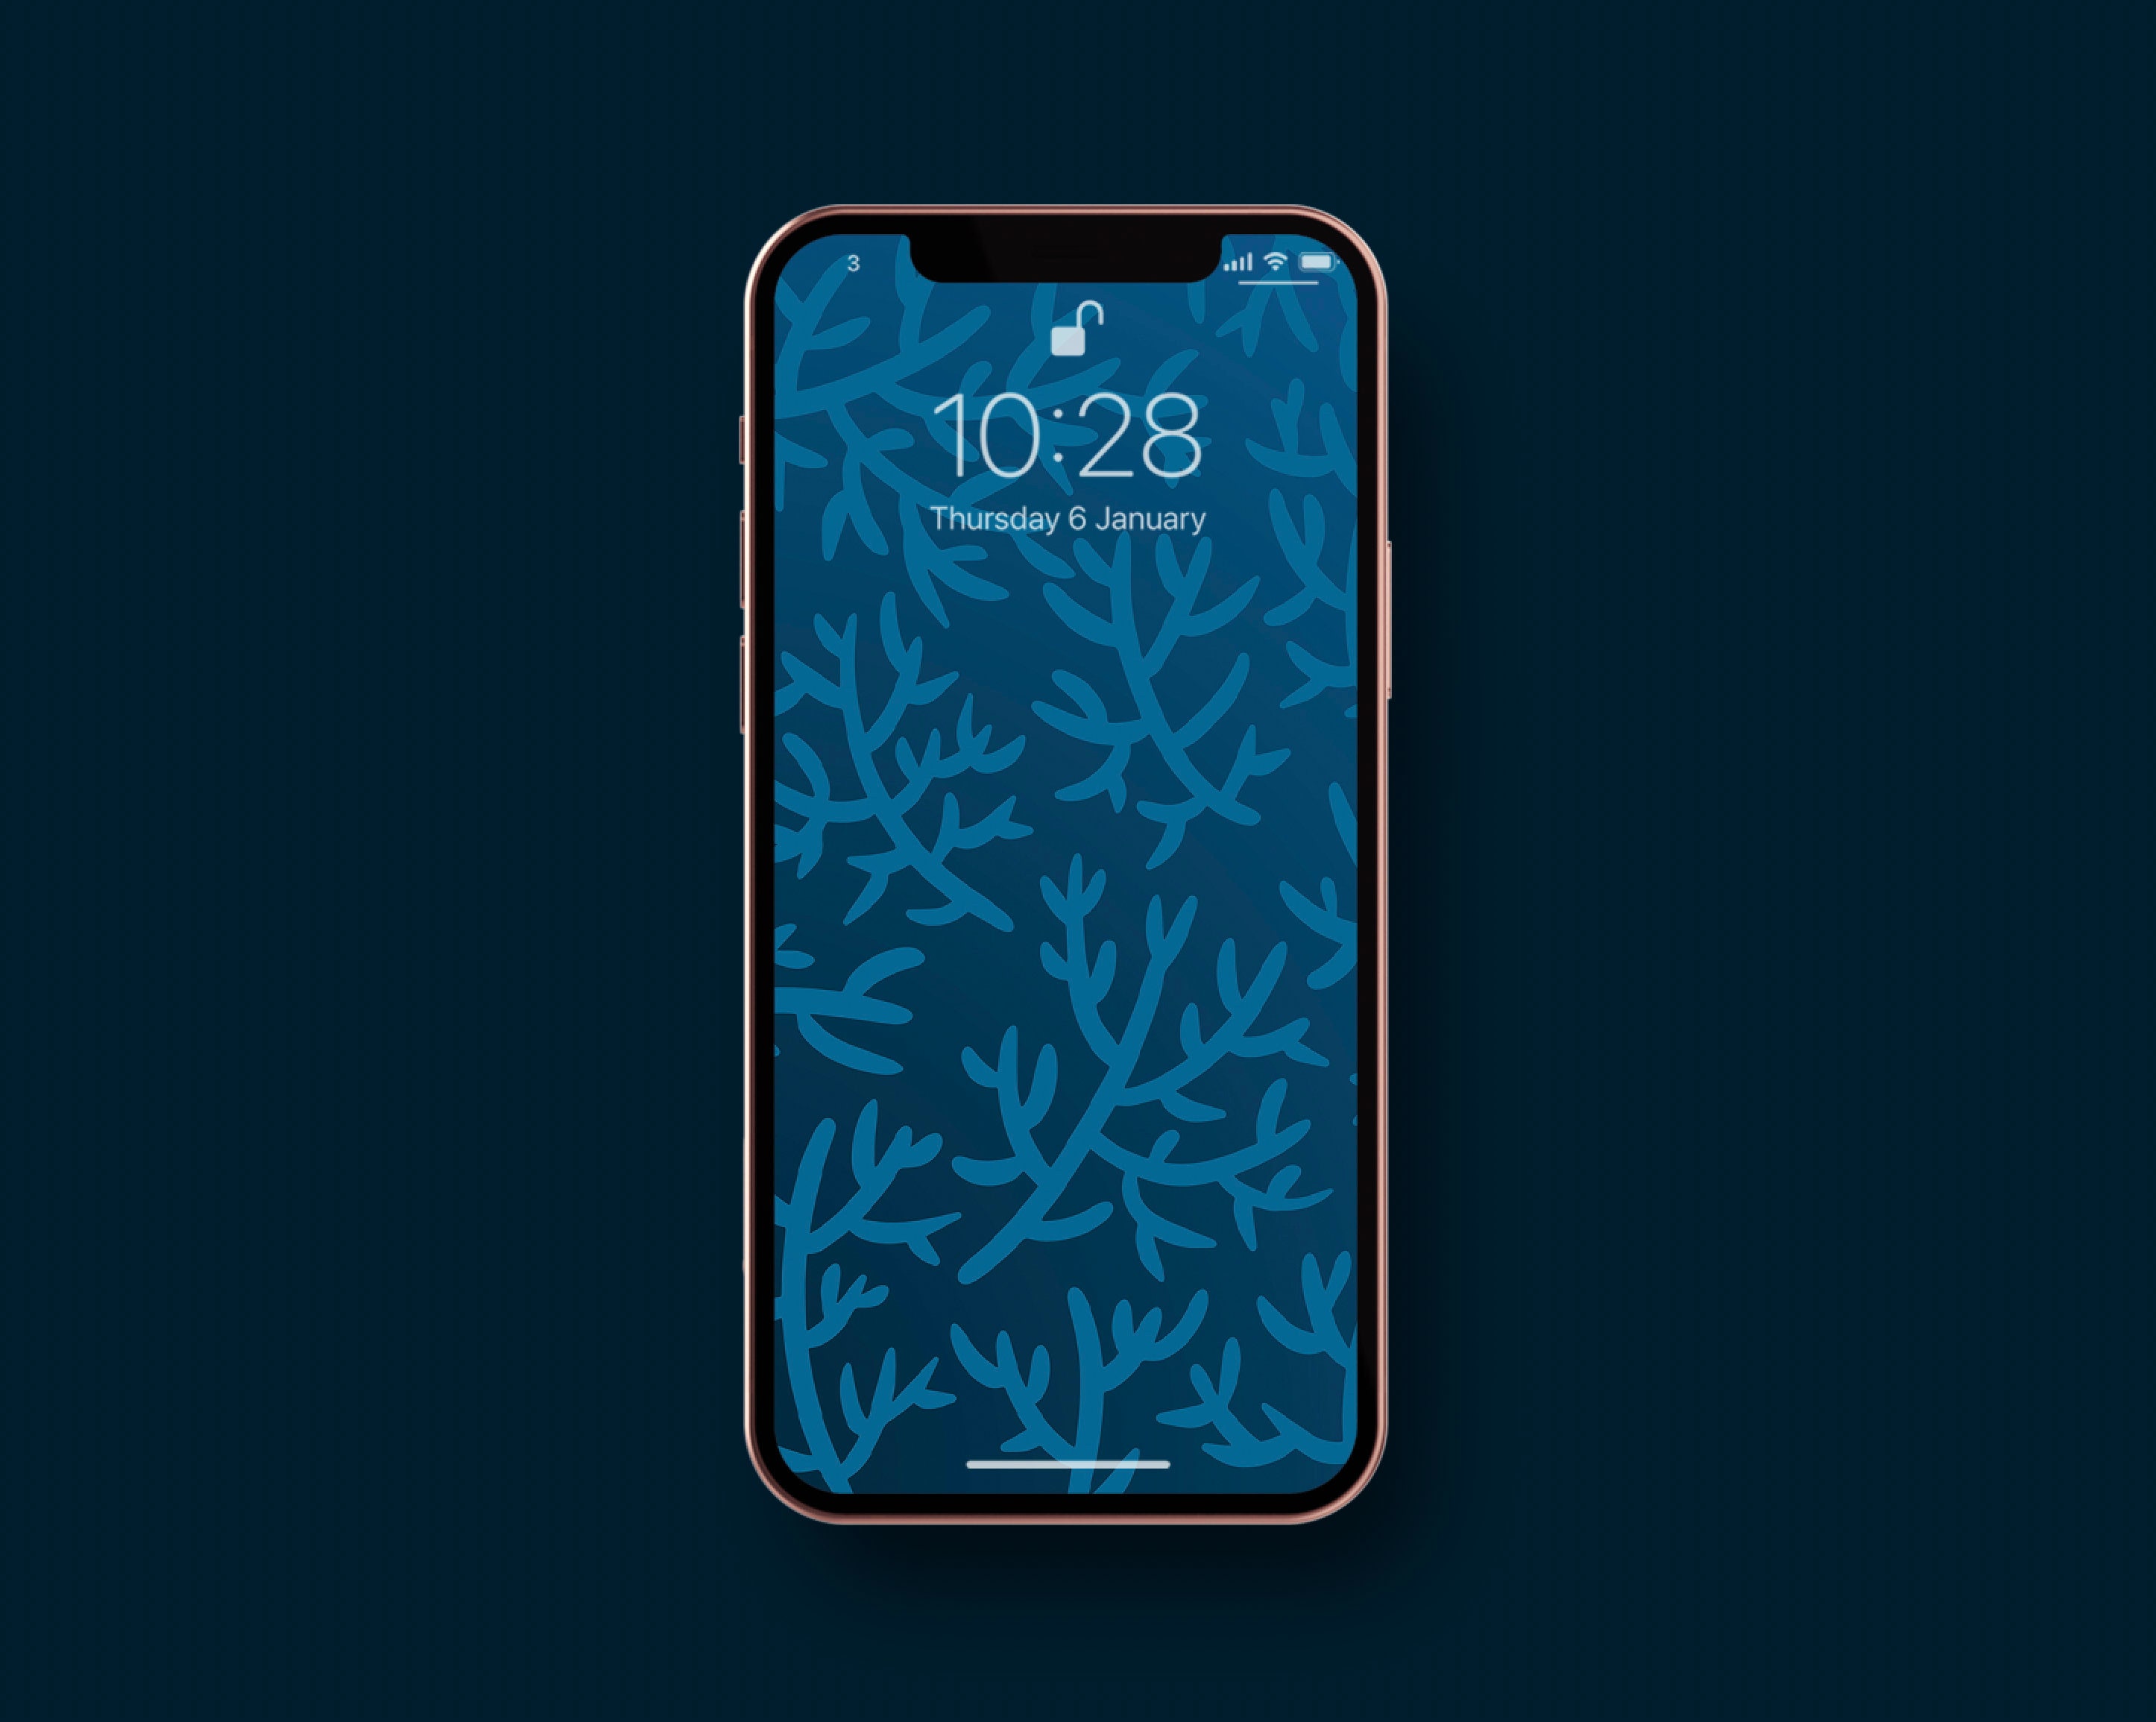 Navy Blue Coral Reef Phone Wallpaper. Blue Iphone Wallpaper. - Etsy